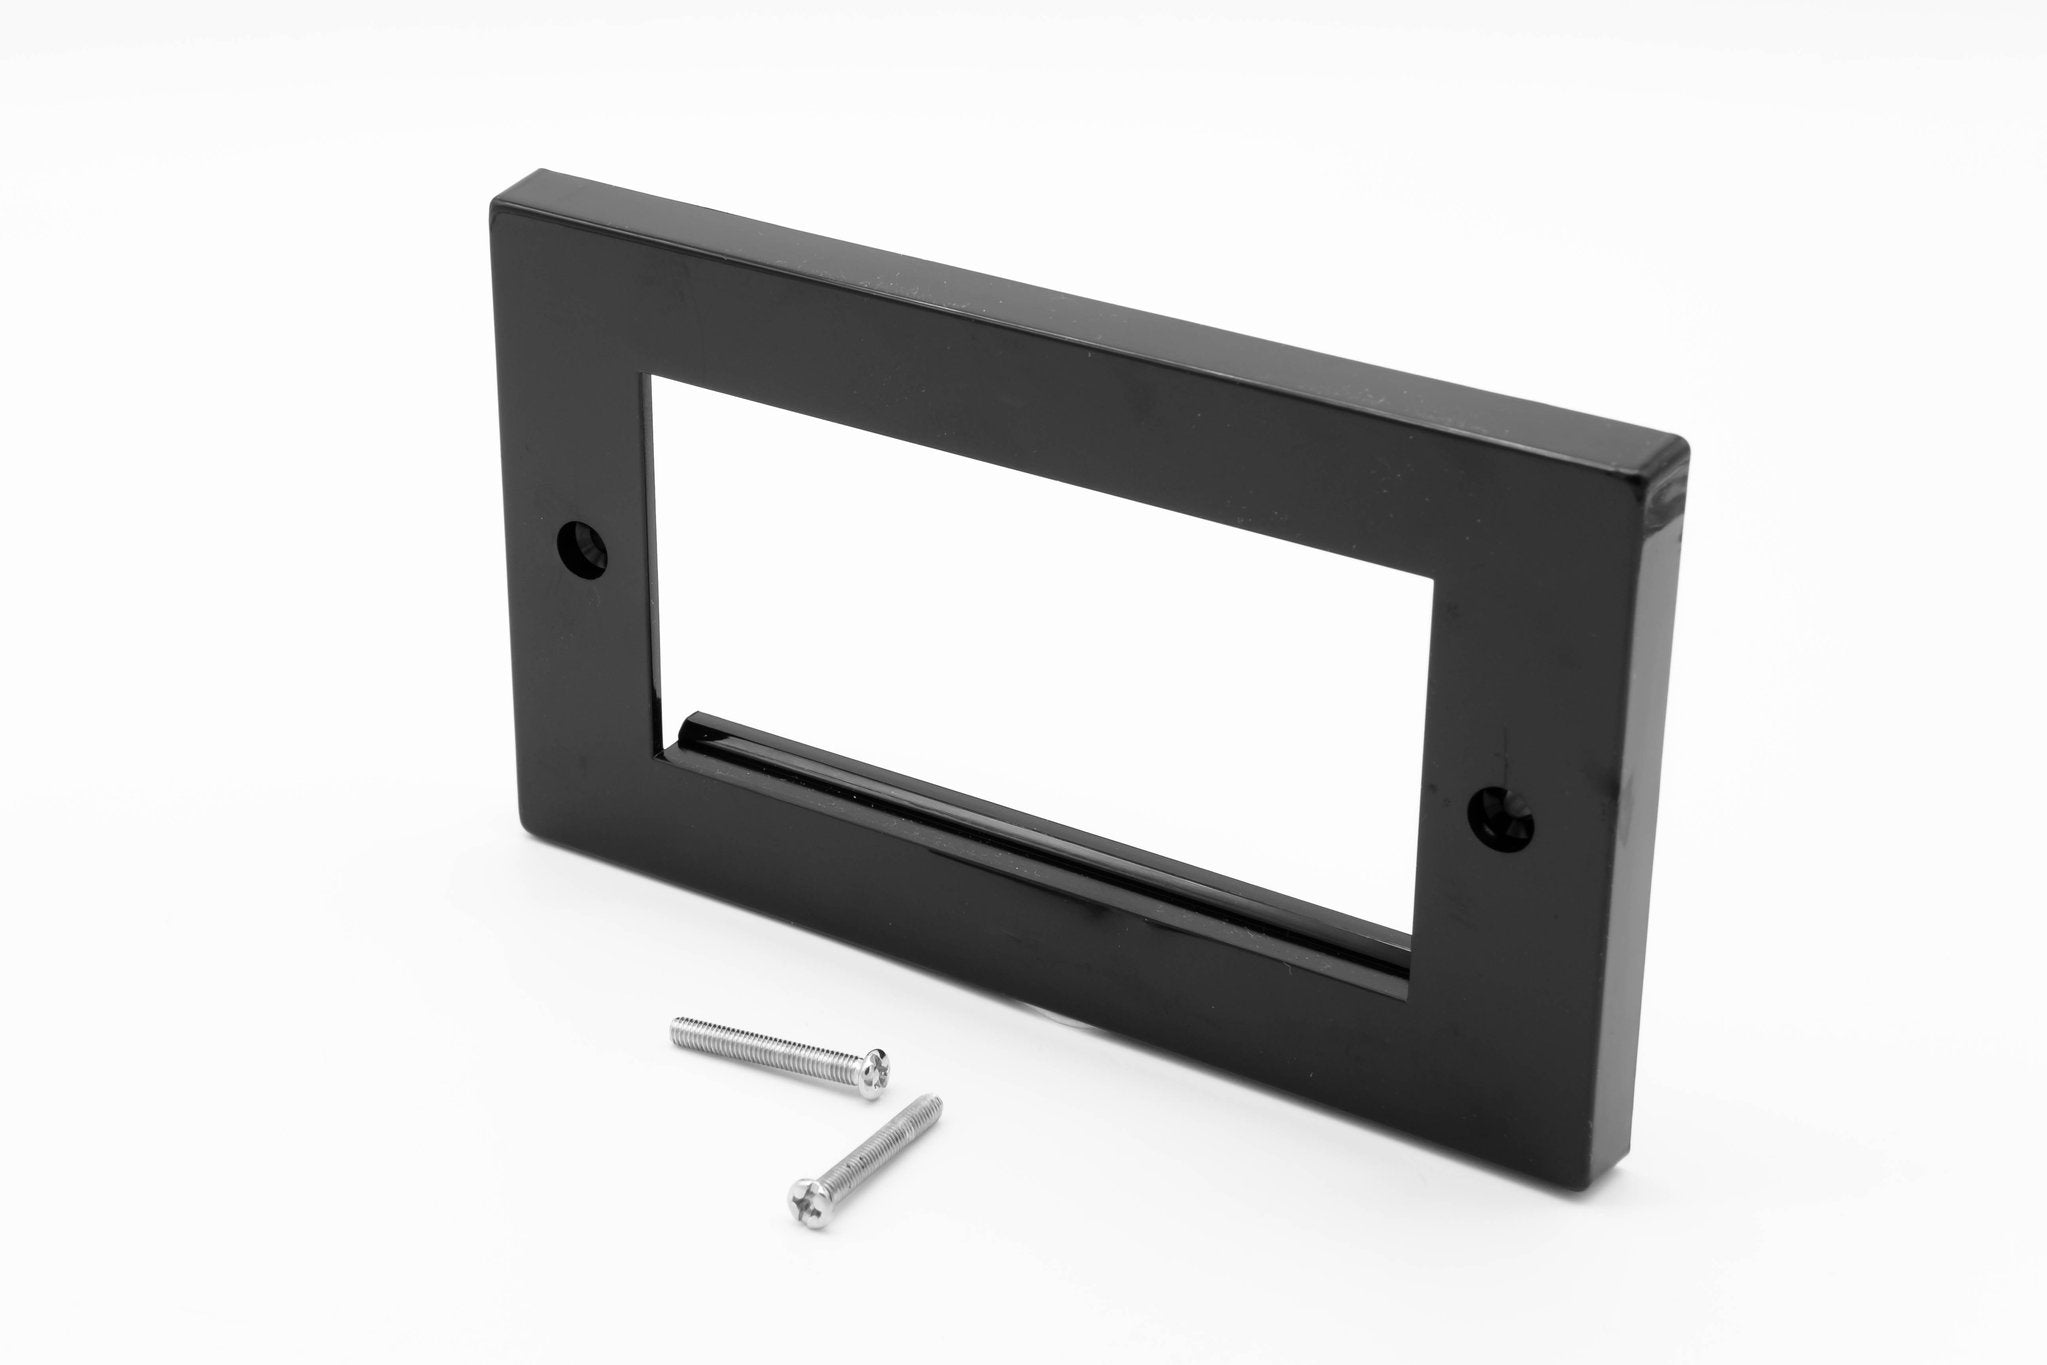 LOW PROFILE DOUBLE GANG (4 SLOT) FACEPLATE FOR 4 X EURO MODULES - BLACK